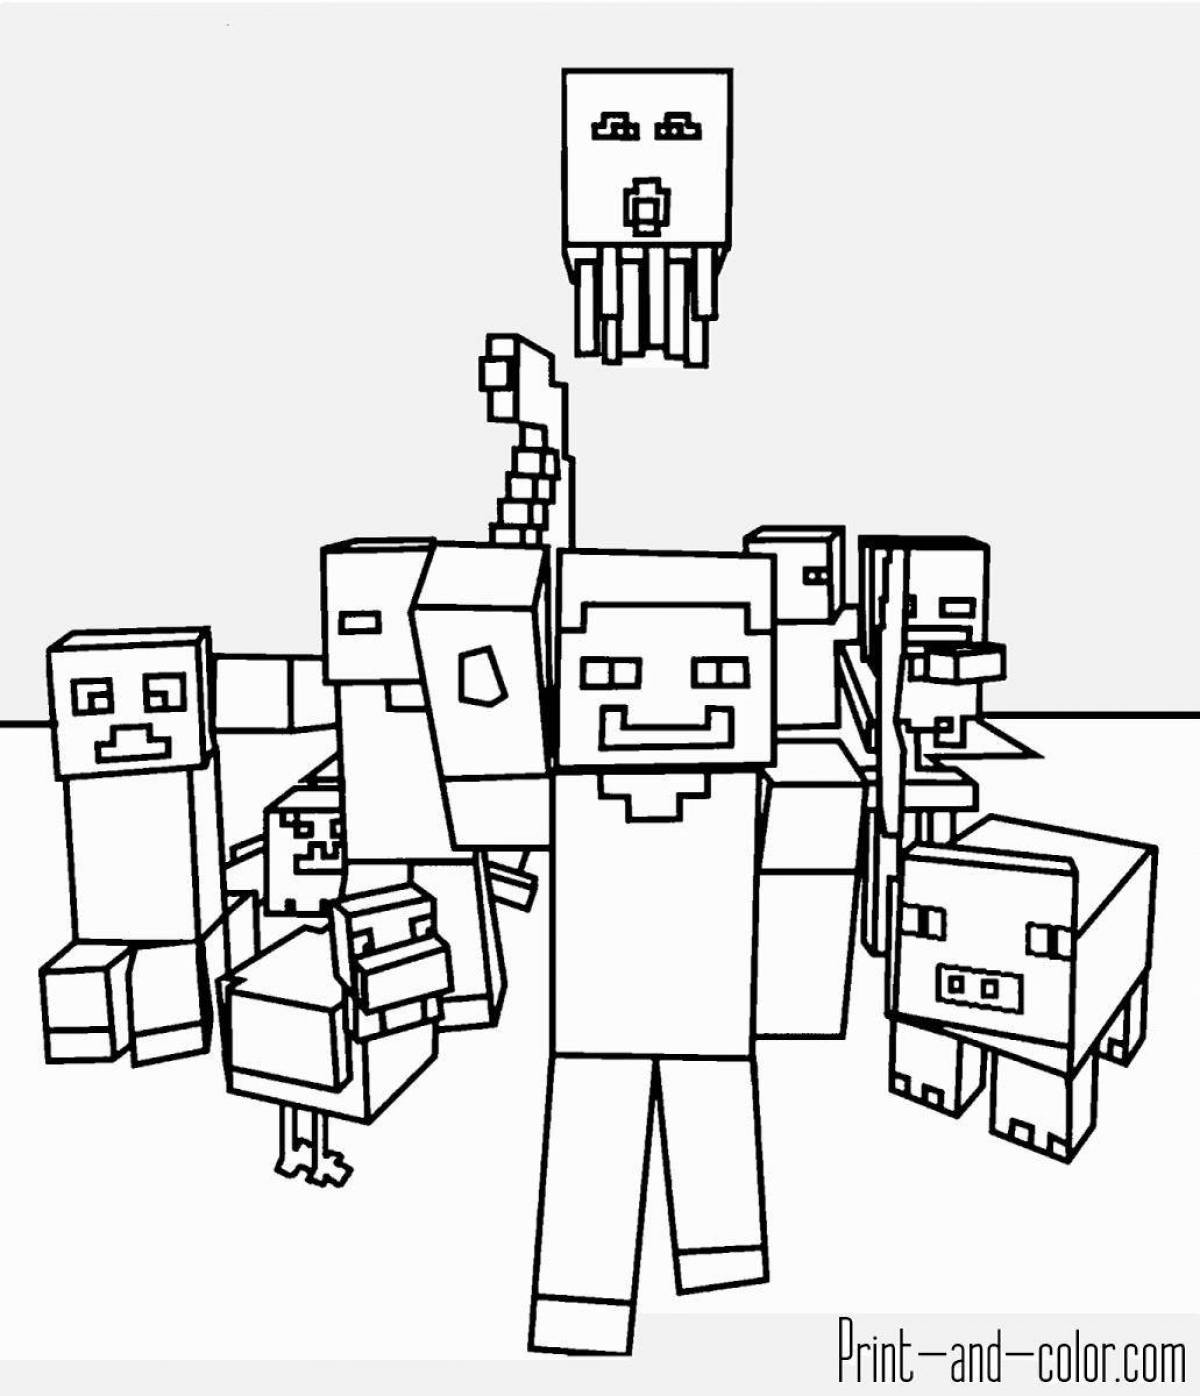 Lovely minecraft panda coloring page